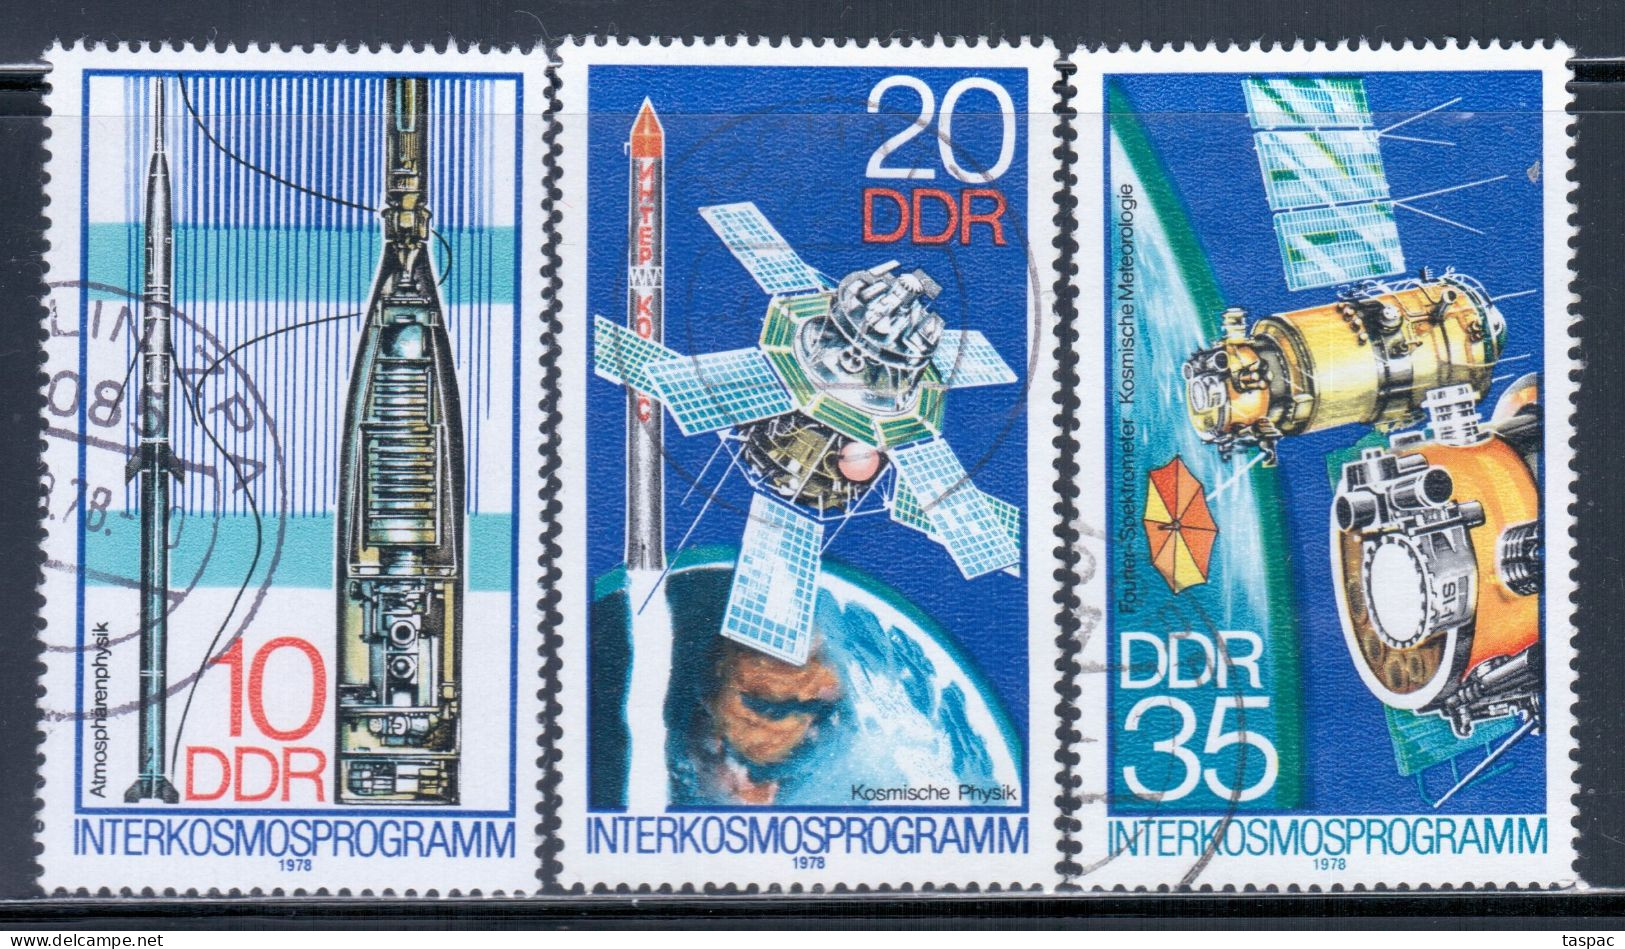 East Germany / DDR 1978 Mi# 2310-2312 Used - Intercosmos / Space - Used Stamps